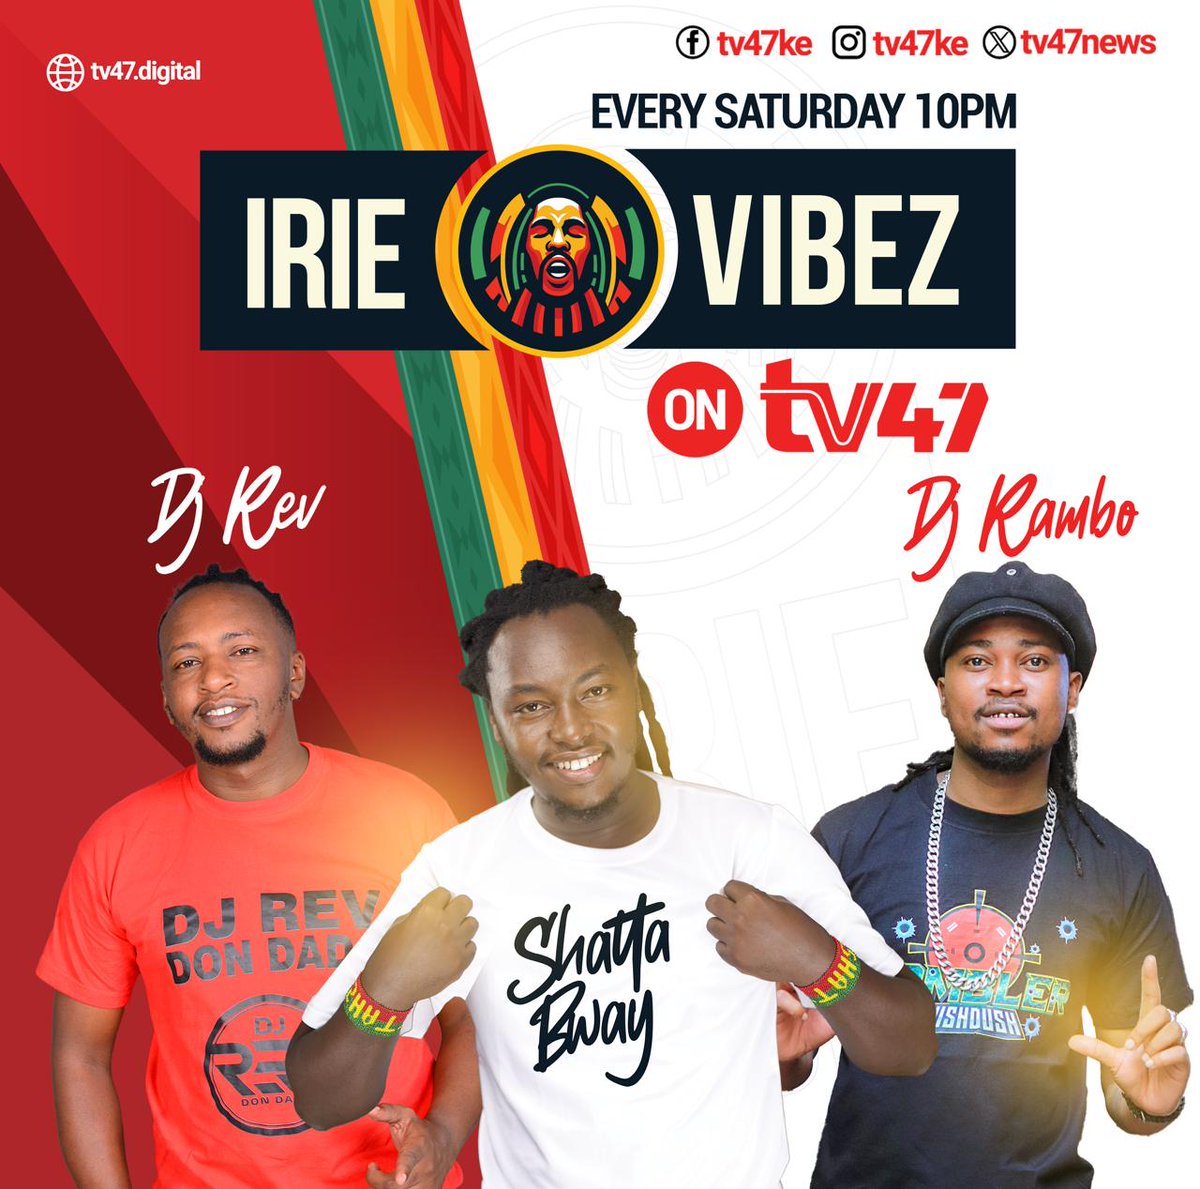 Feel the fire of reggae passion burning bright on #IrieVibezTV47. @ShattaTikiTaka will be bringing the heat with the hottest tracks and the coolest vibes. Get ready to turn up the volume